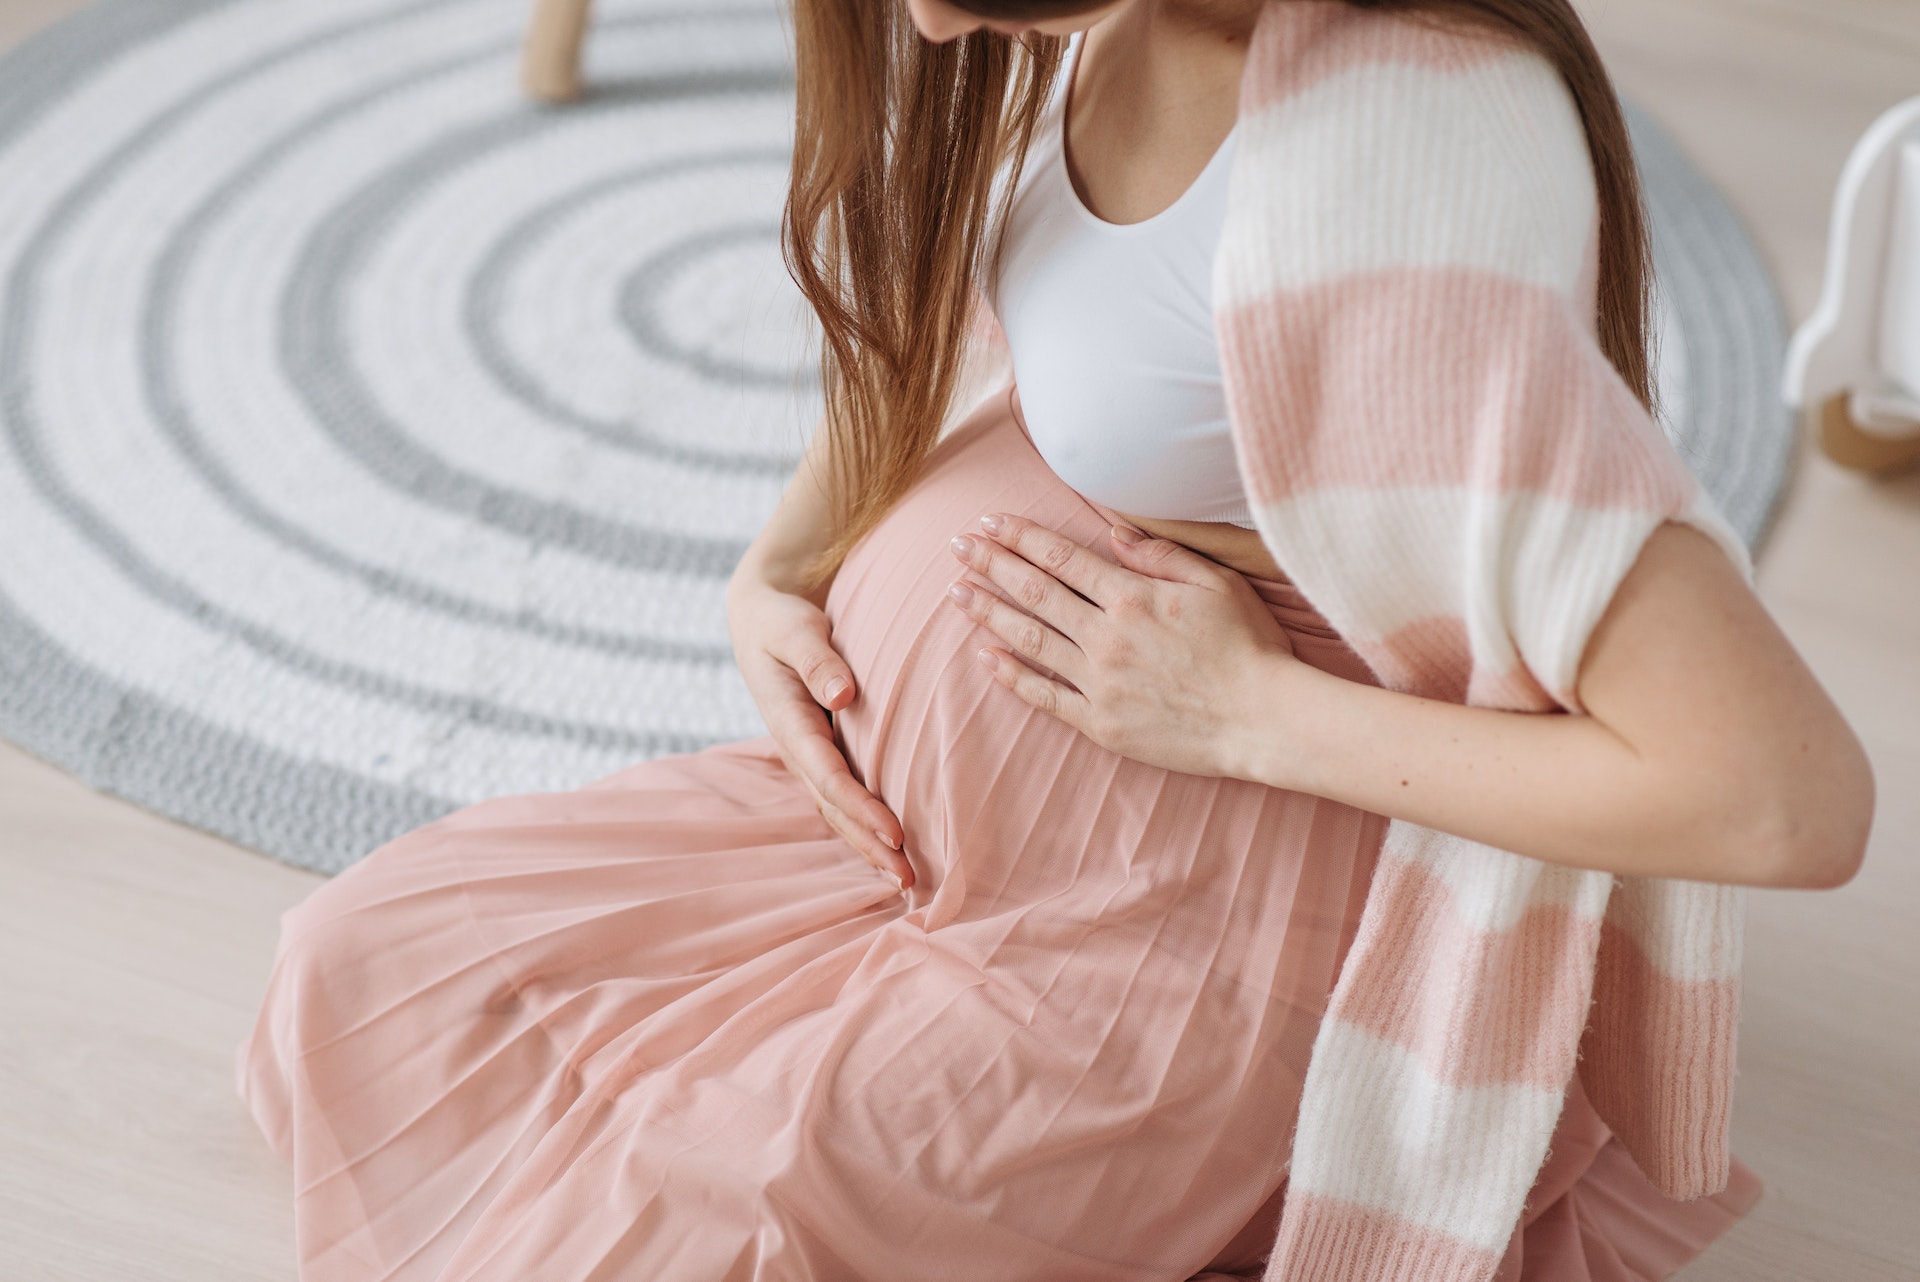 A pregnant woman sitting on a chair | Source: Pexels